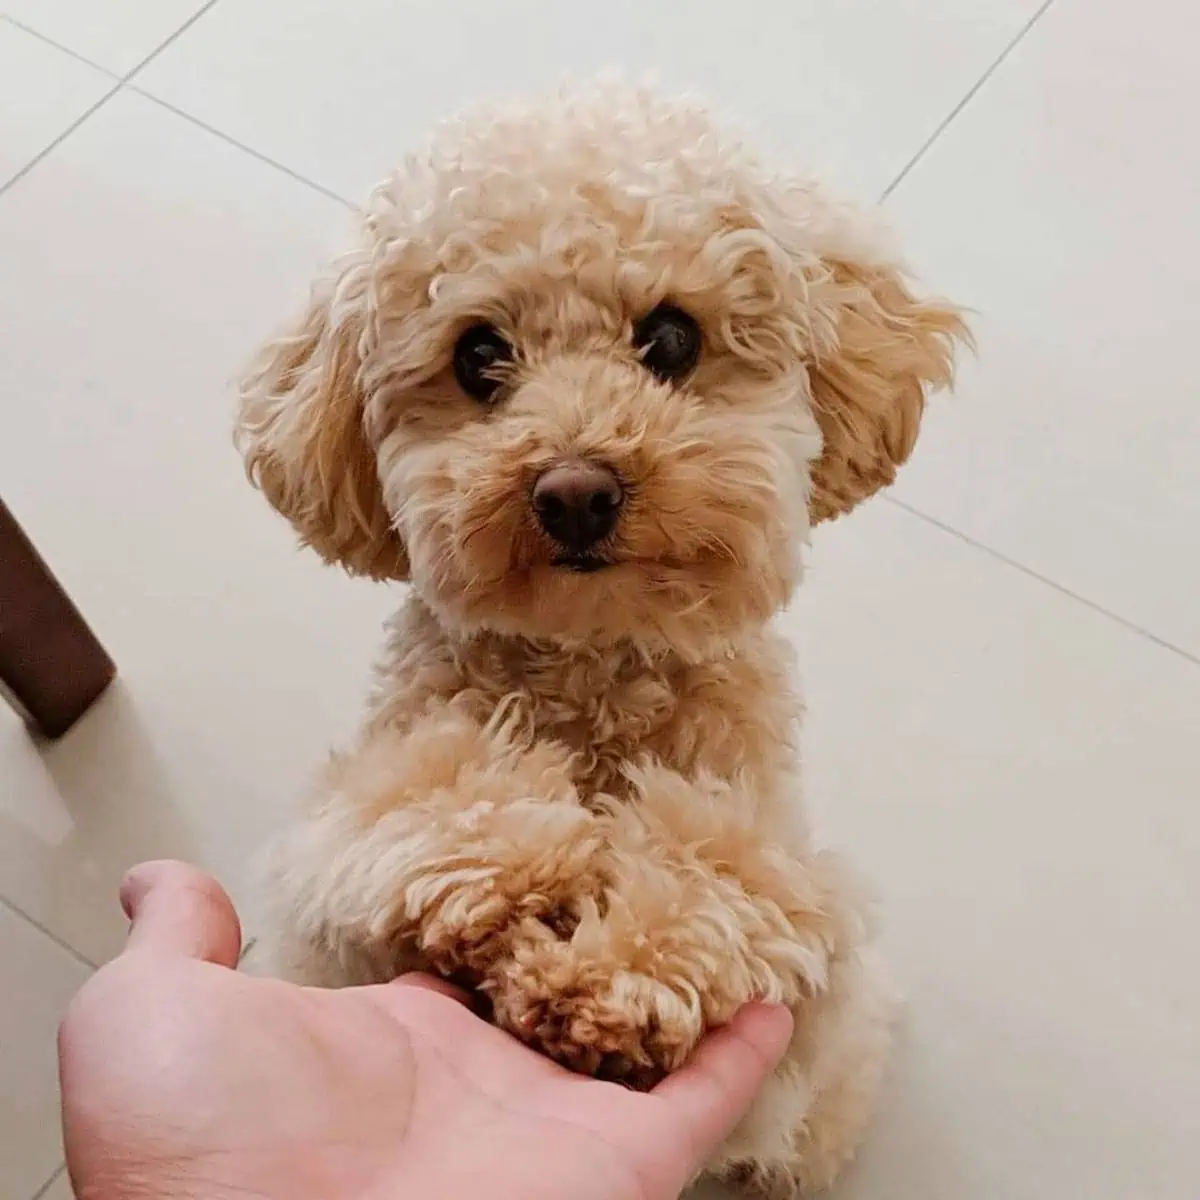 Poodle staring at the owner